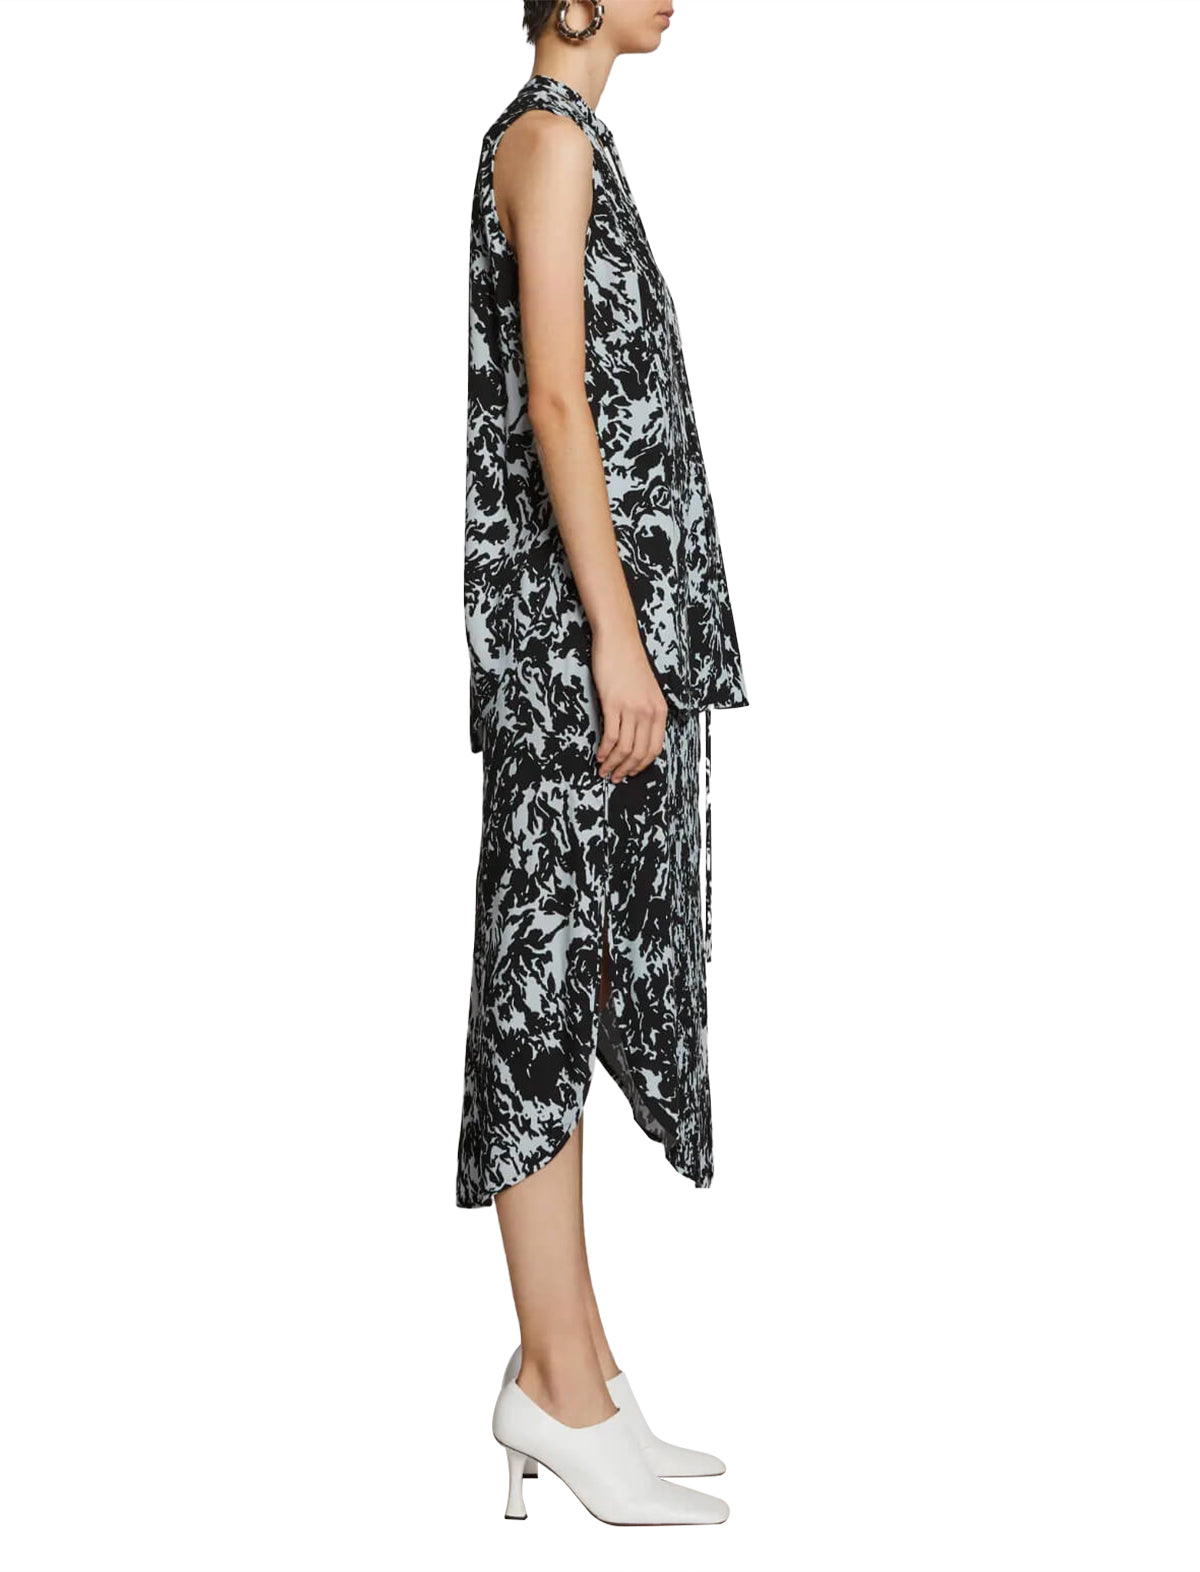 PROENZA SCHOULER WHITE LABEL Printed Georgette Sleeveless Pintuck Top